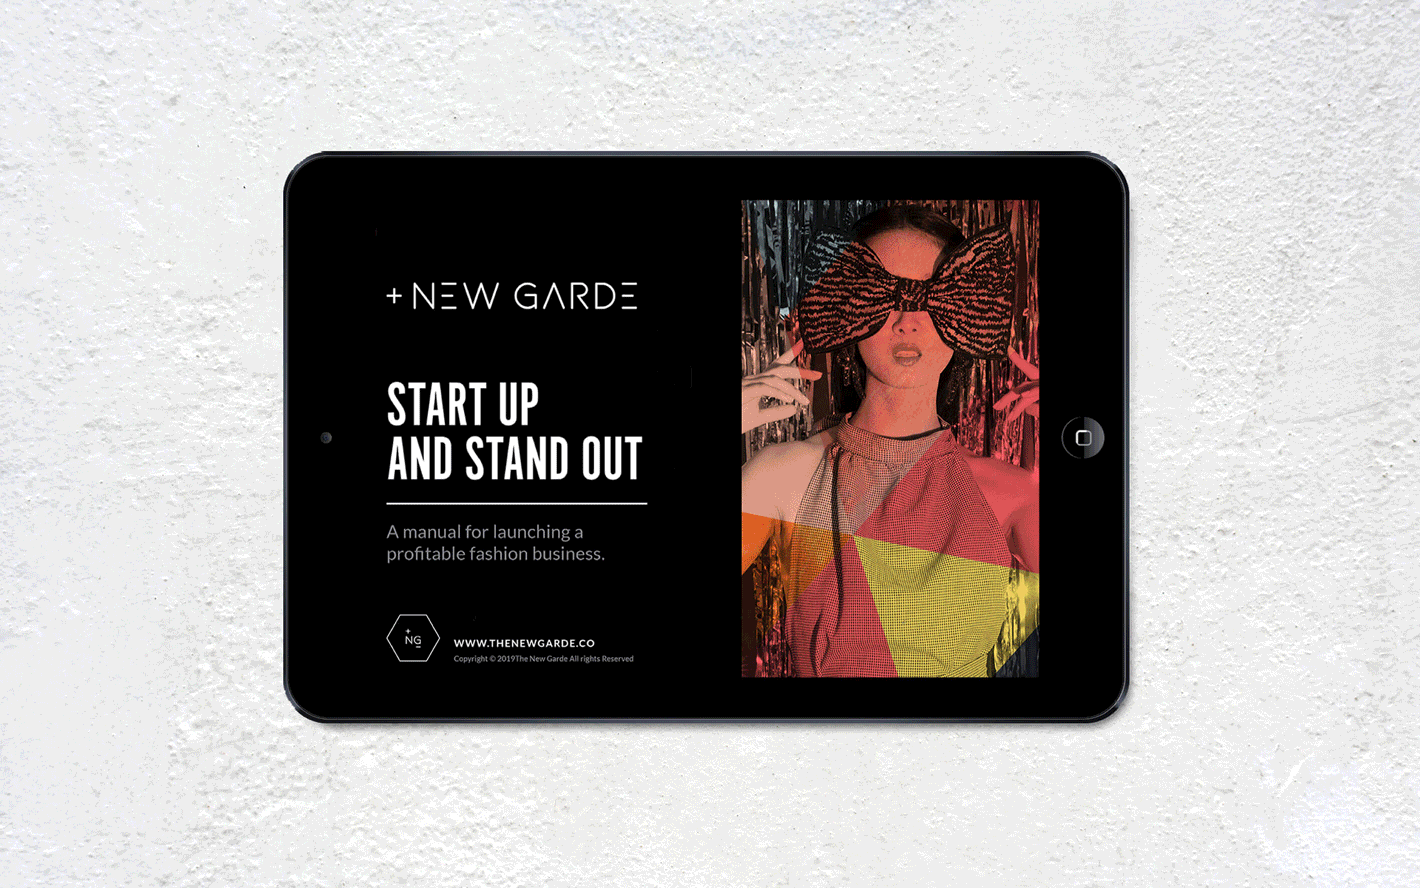 Ipad view of start up fashion ebook workbook for The New Garde pages